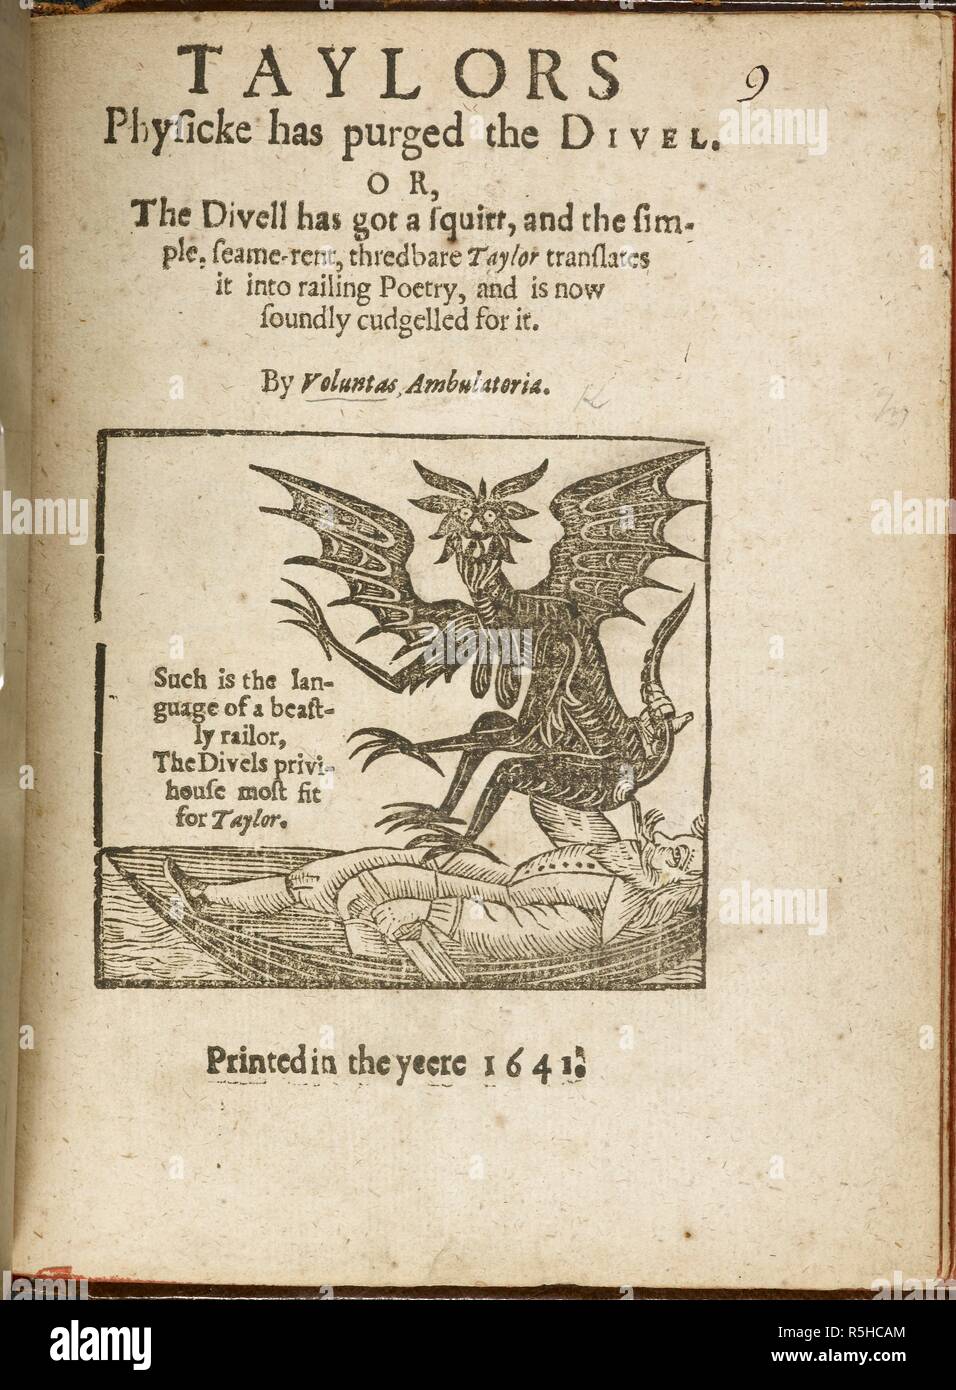 Title page of 'Taylors Physicke has purged the Divel...' showing a depiction of the Devil. Taylors Physicke has purged the Divel ... [A satire on John Taylor the Water Poet.] By Voluntas Ambulatoria. London, 1641. Source: E.163.(9), title page. Language: English. Stock Photo